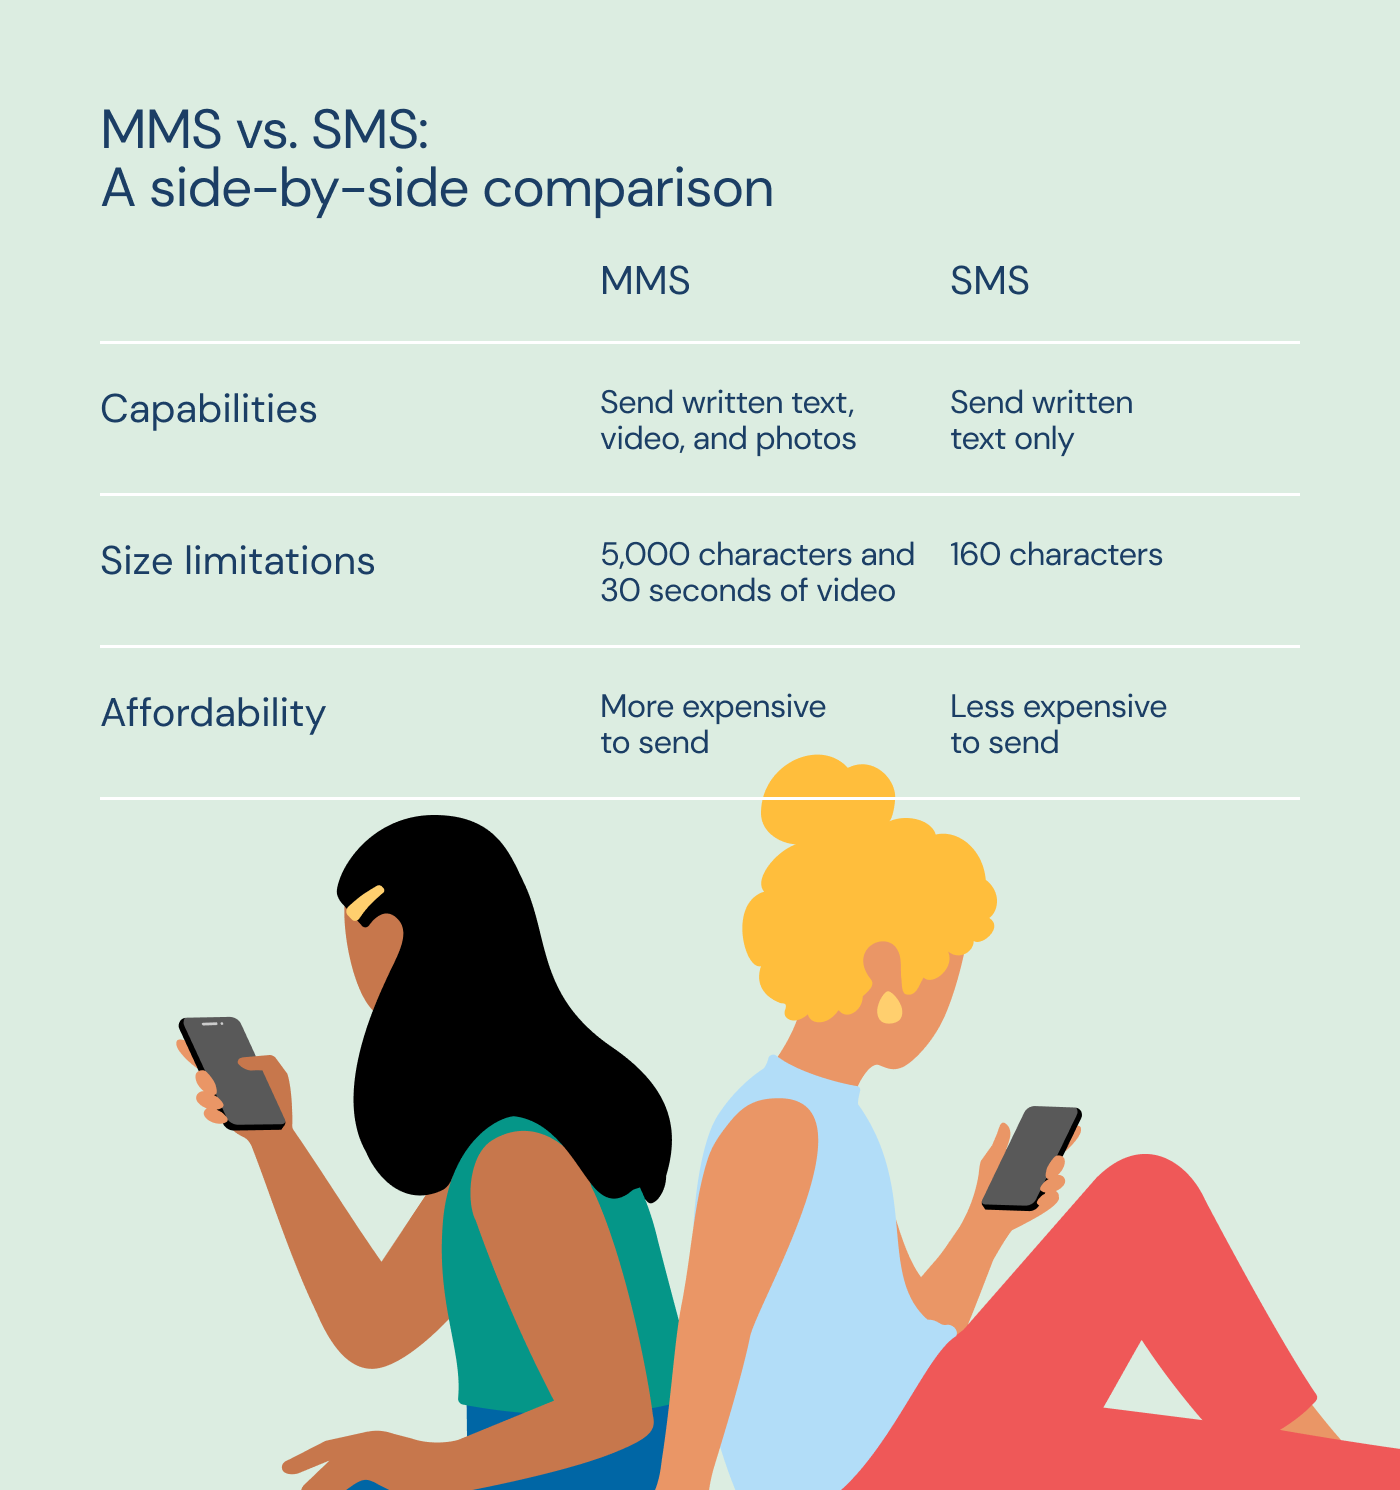 Table summarizing the similarities and differences of MMS and SMS